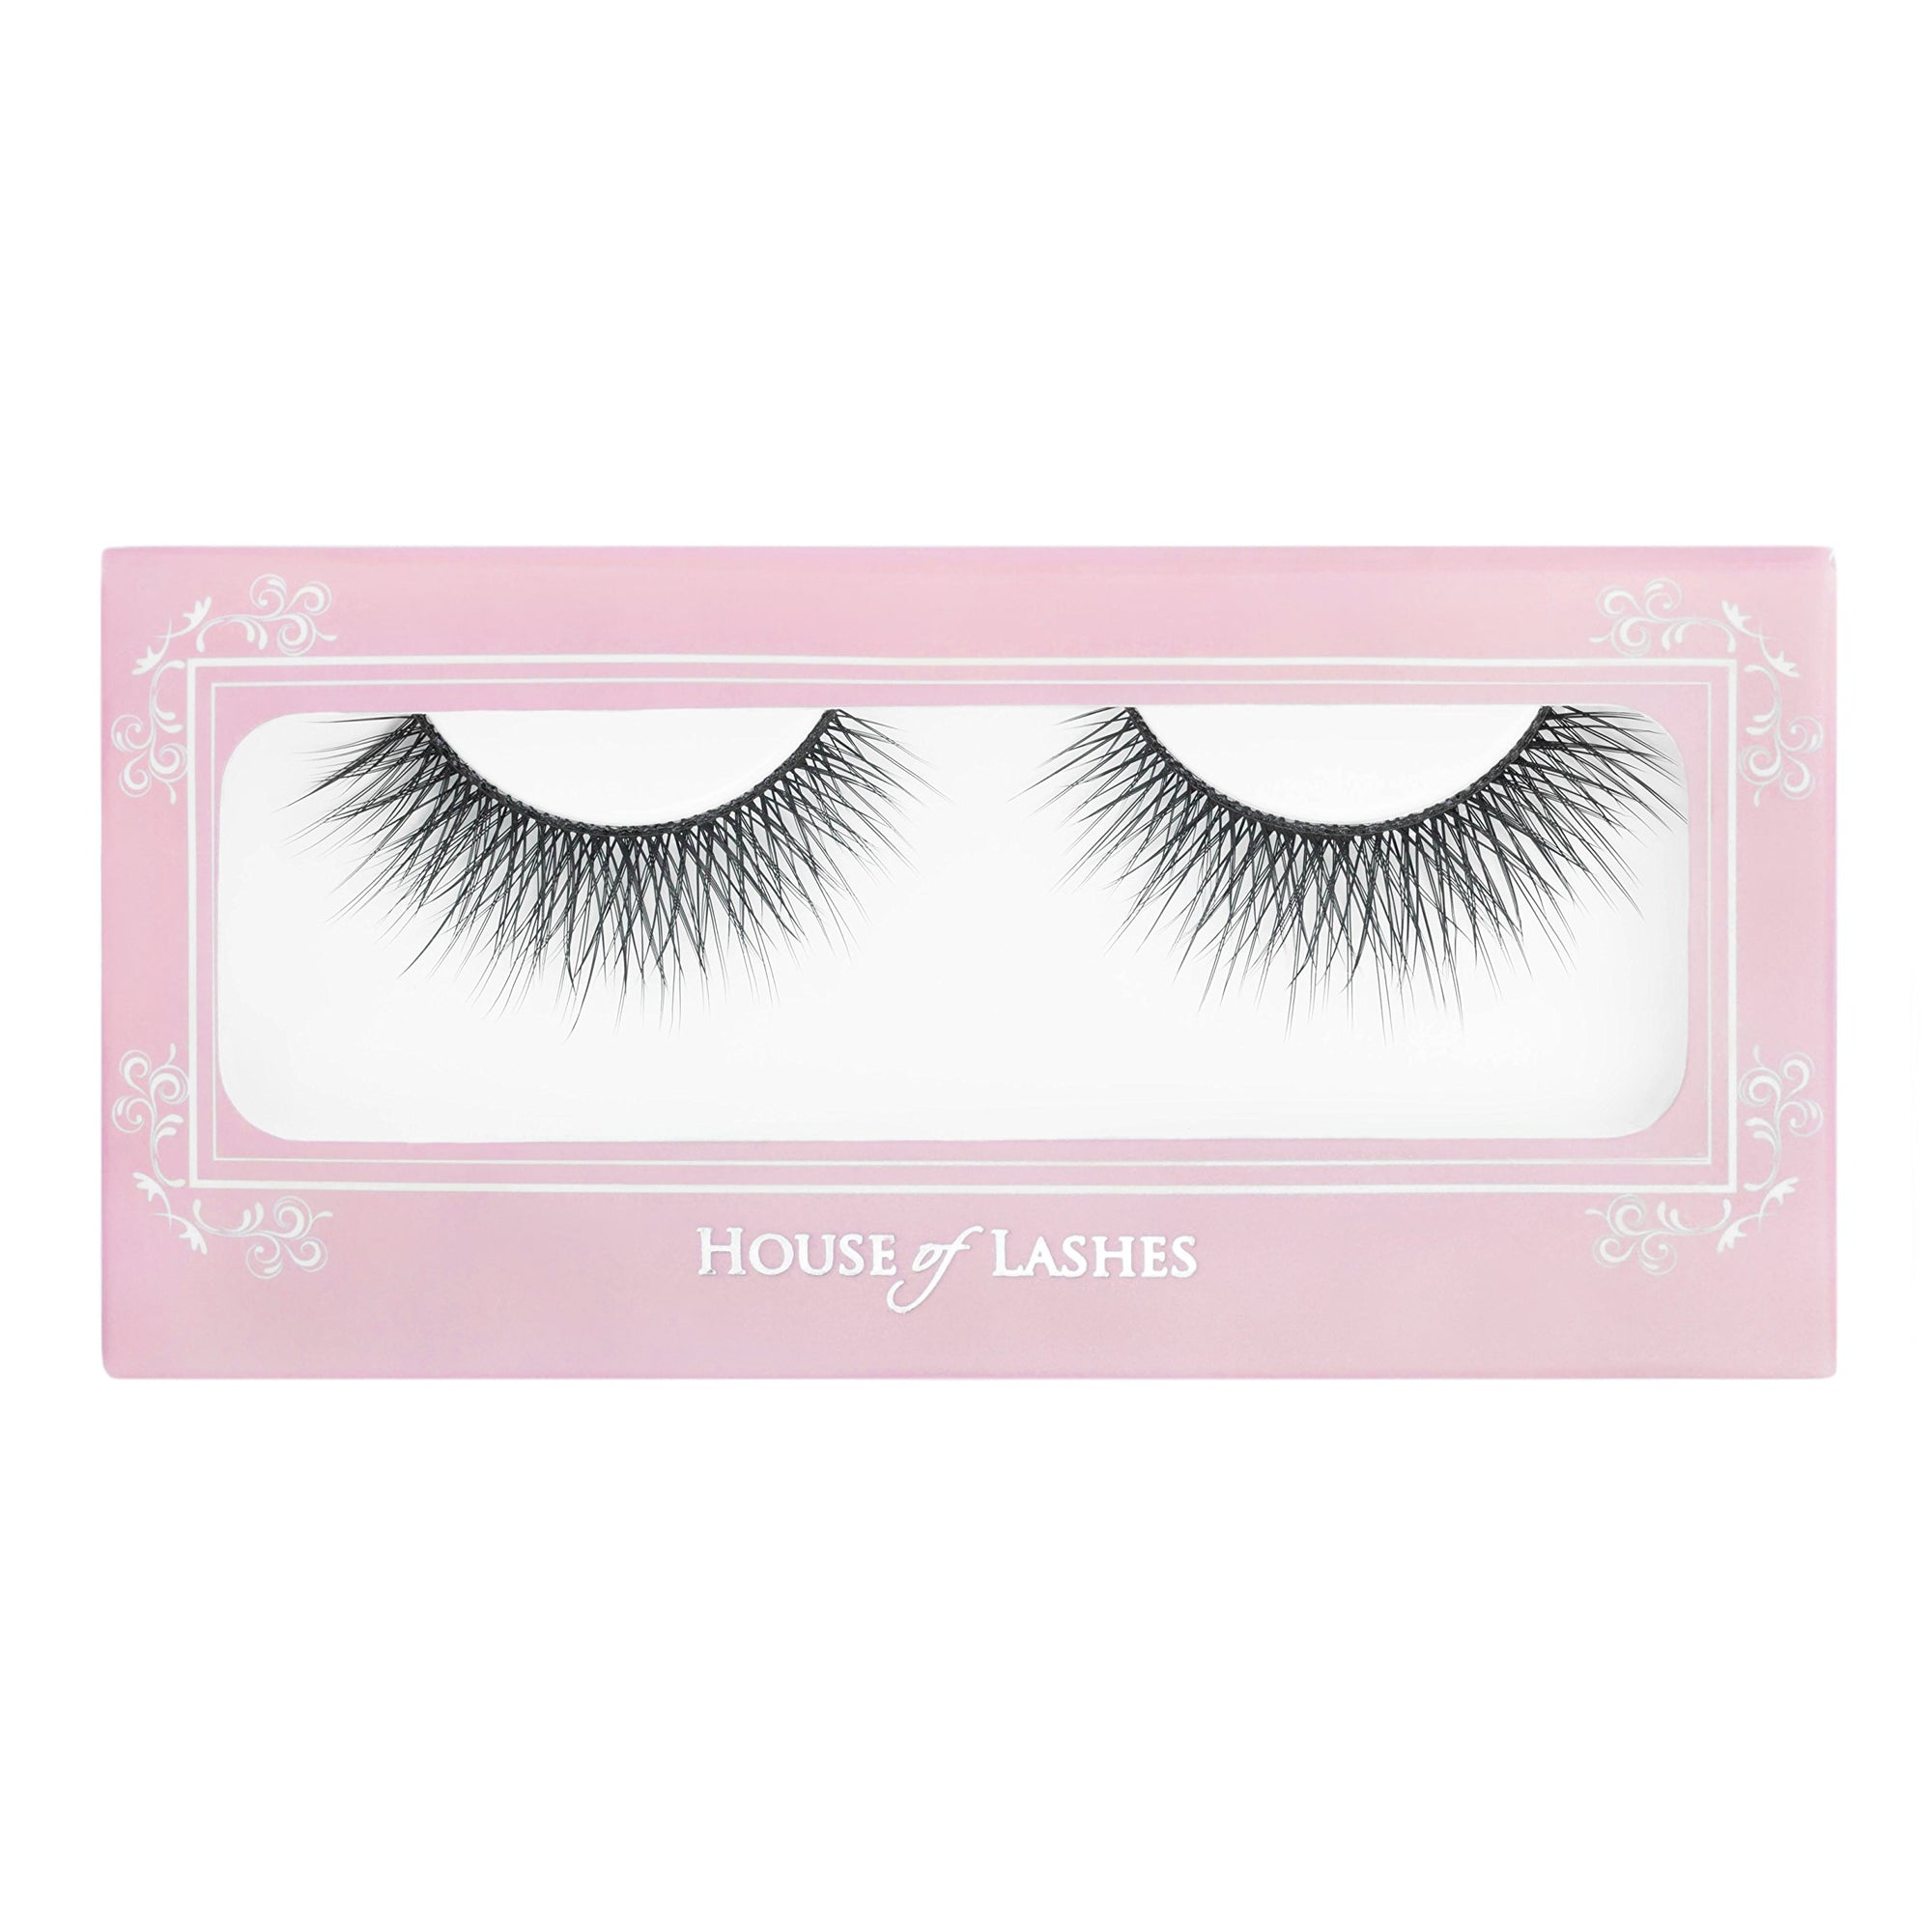 House of lashes - Pixie Luxe